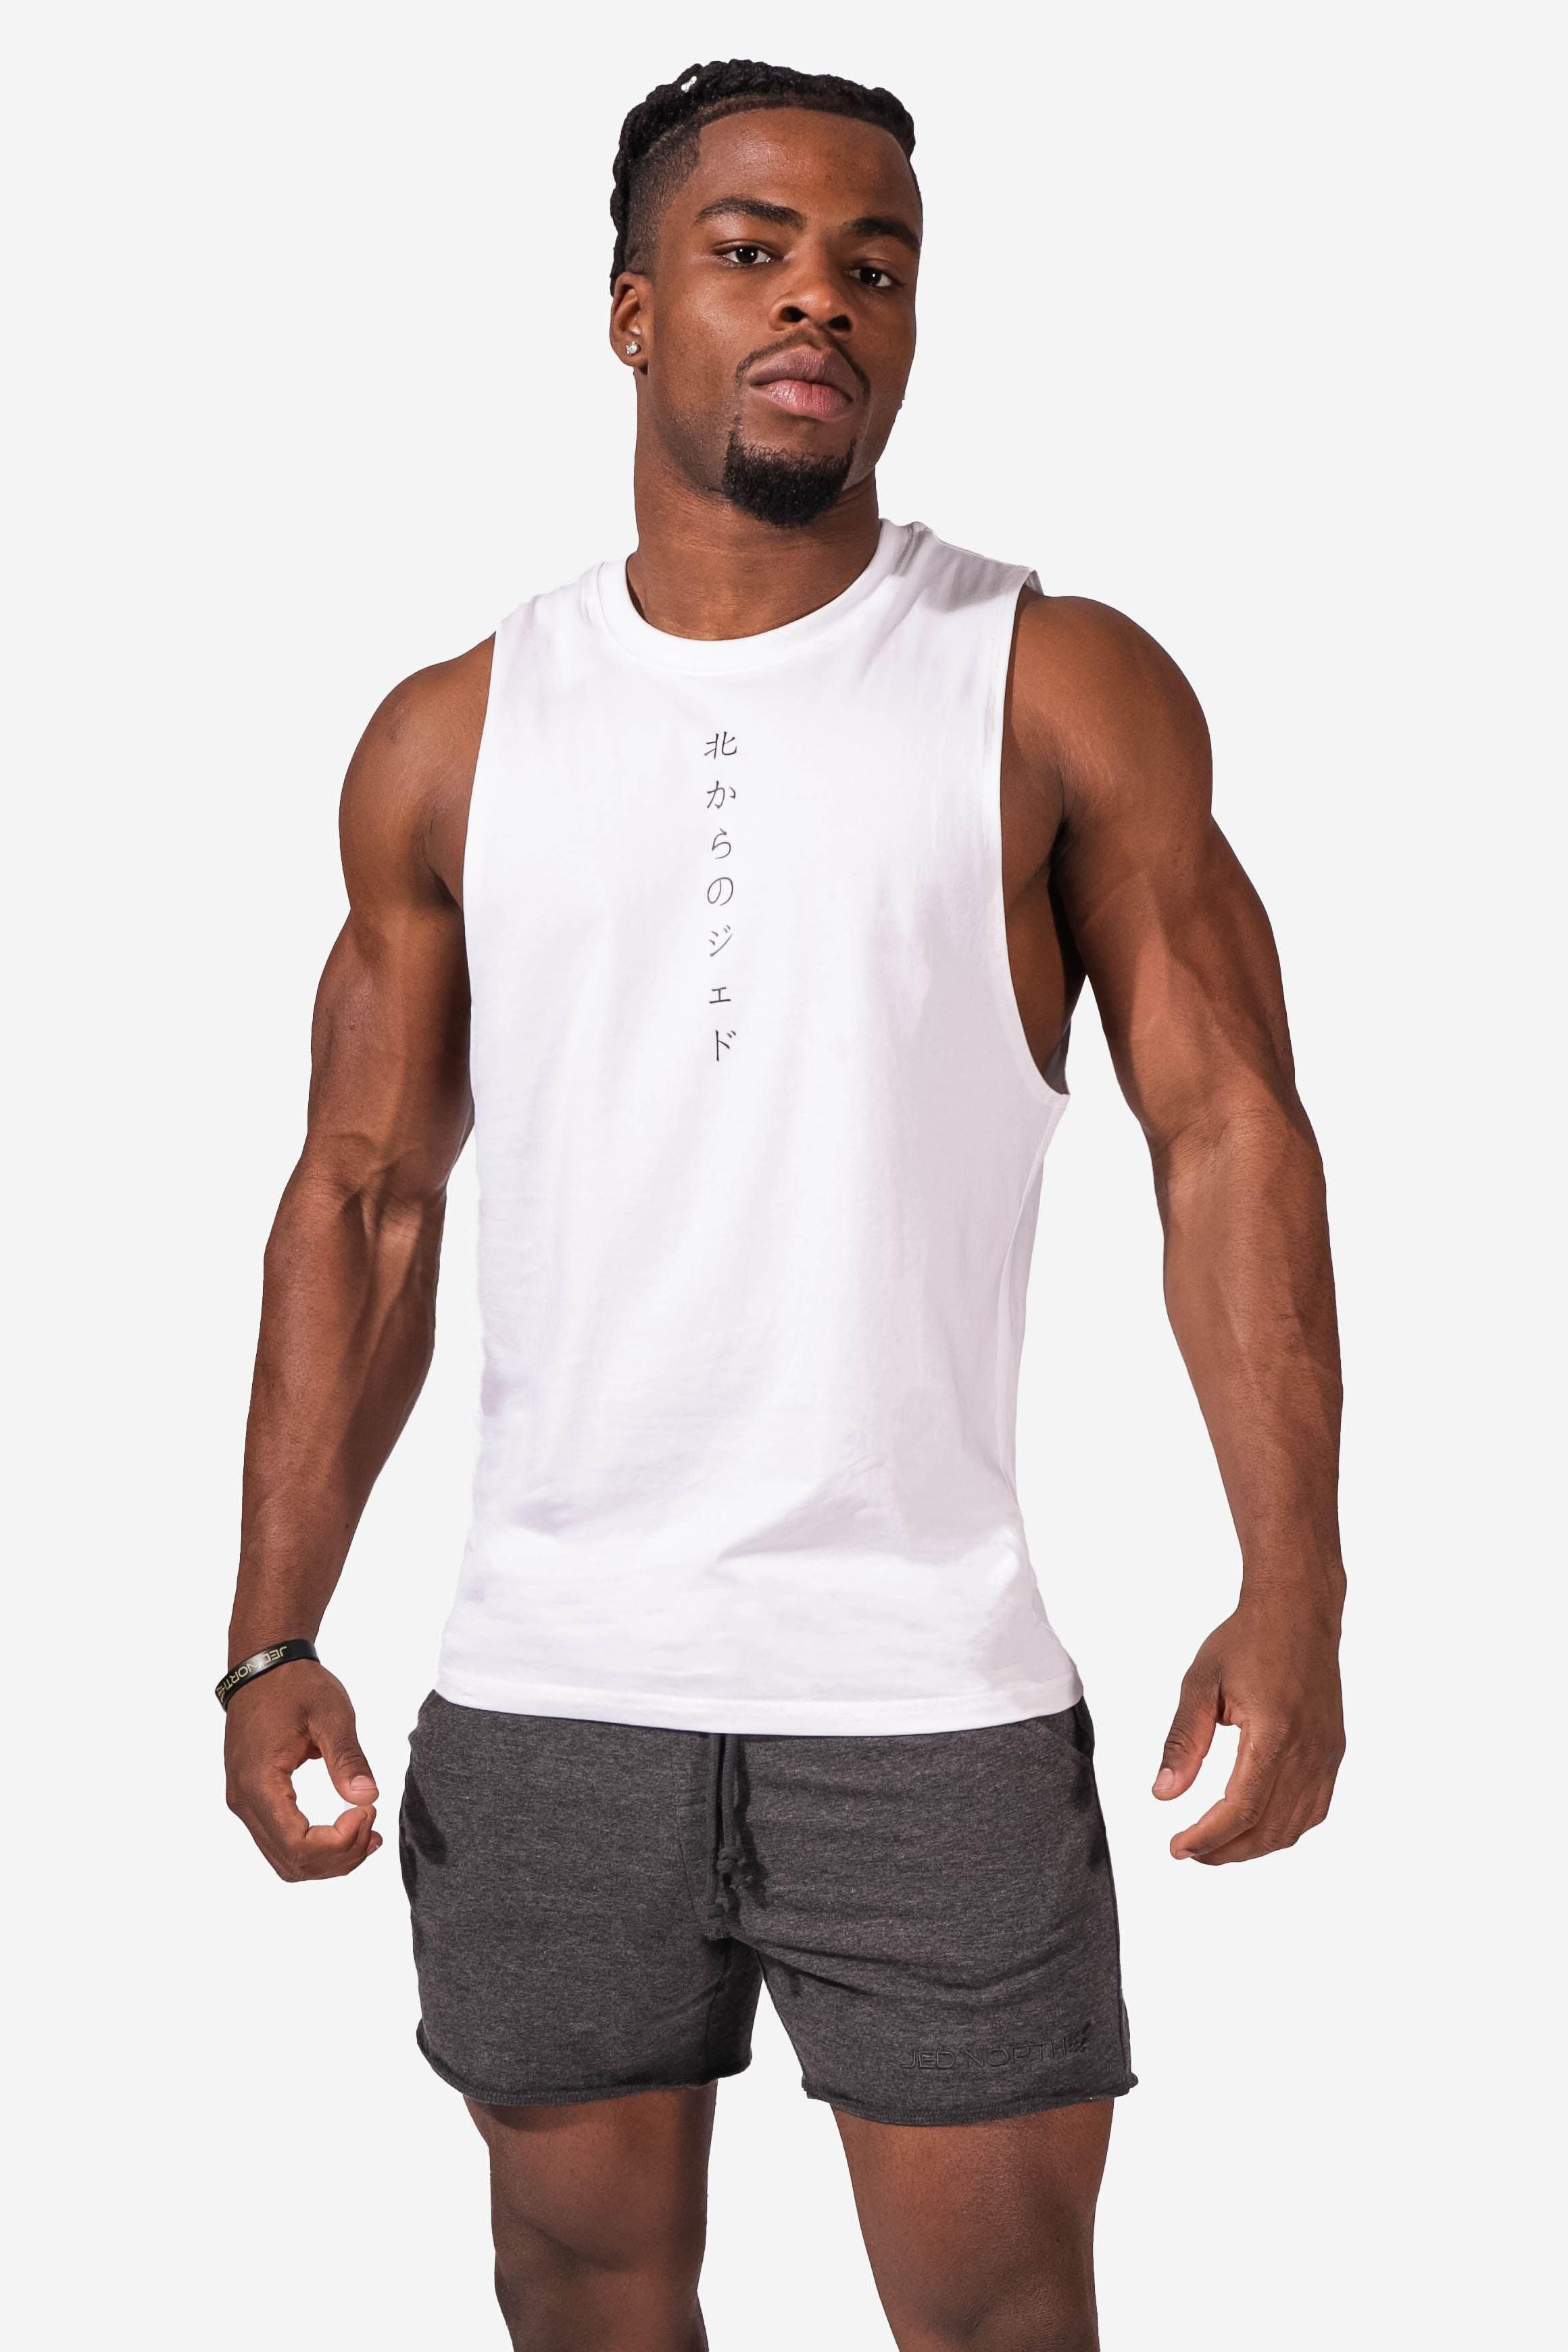 Mens Workout Tank Tops Fitness Muscle Sleeveless Shirts Gym